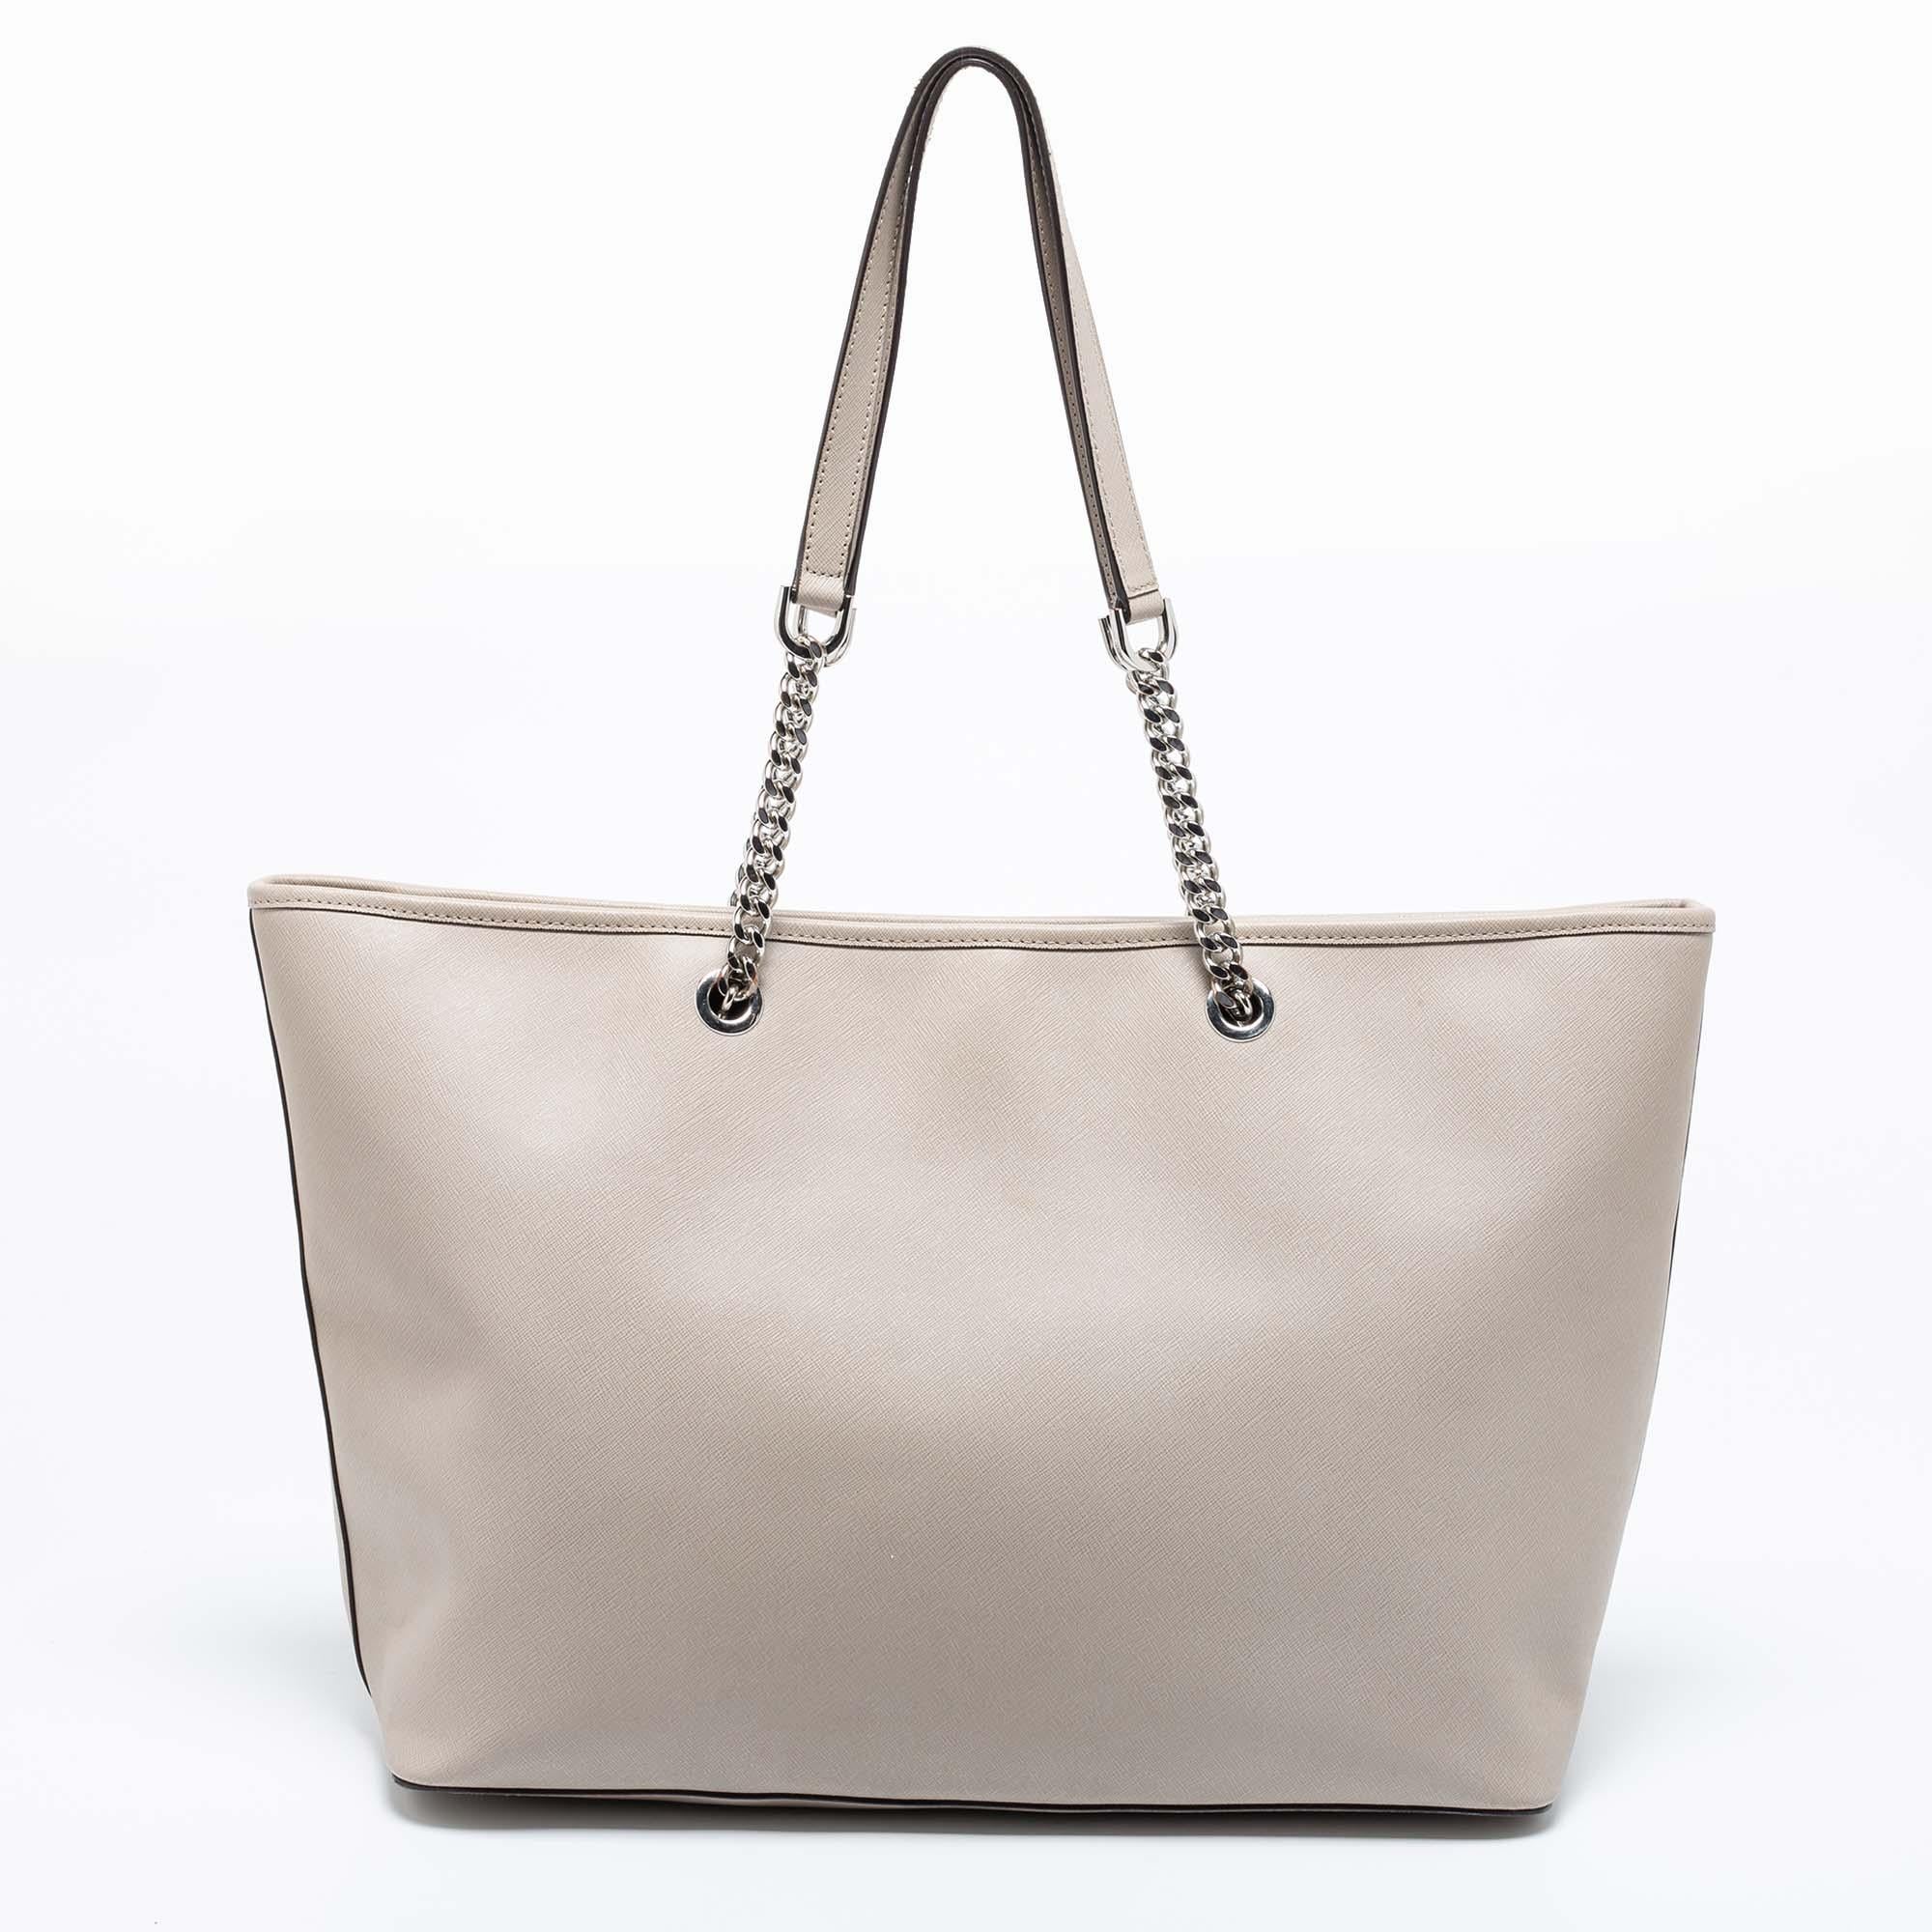 This Michael Kors tote is beautiful in so many ways. From its design to its structure, the leather bag exudes charm and high fashion. It flaunts two shoulder handles for you to swing and a spacious fabric interior to hold all your essentials.

